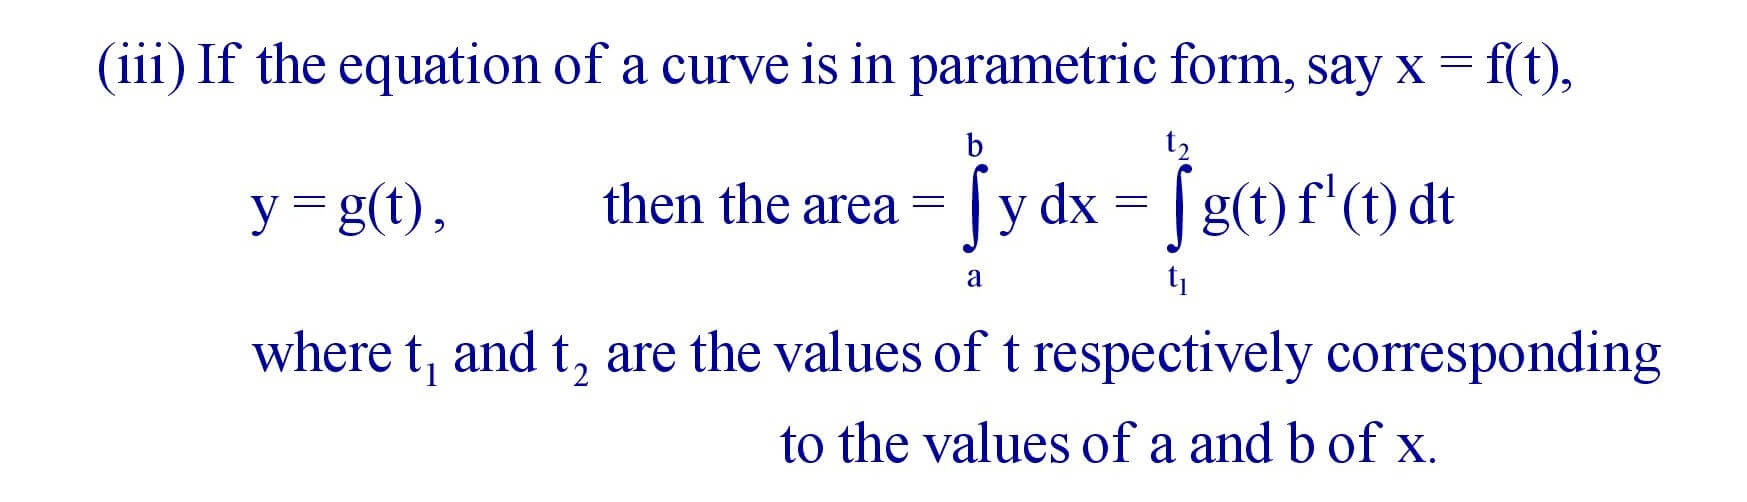 Area bounded by a curve